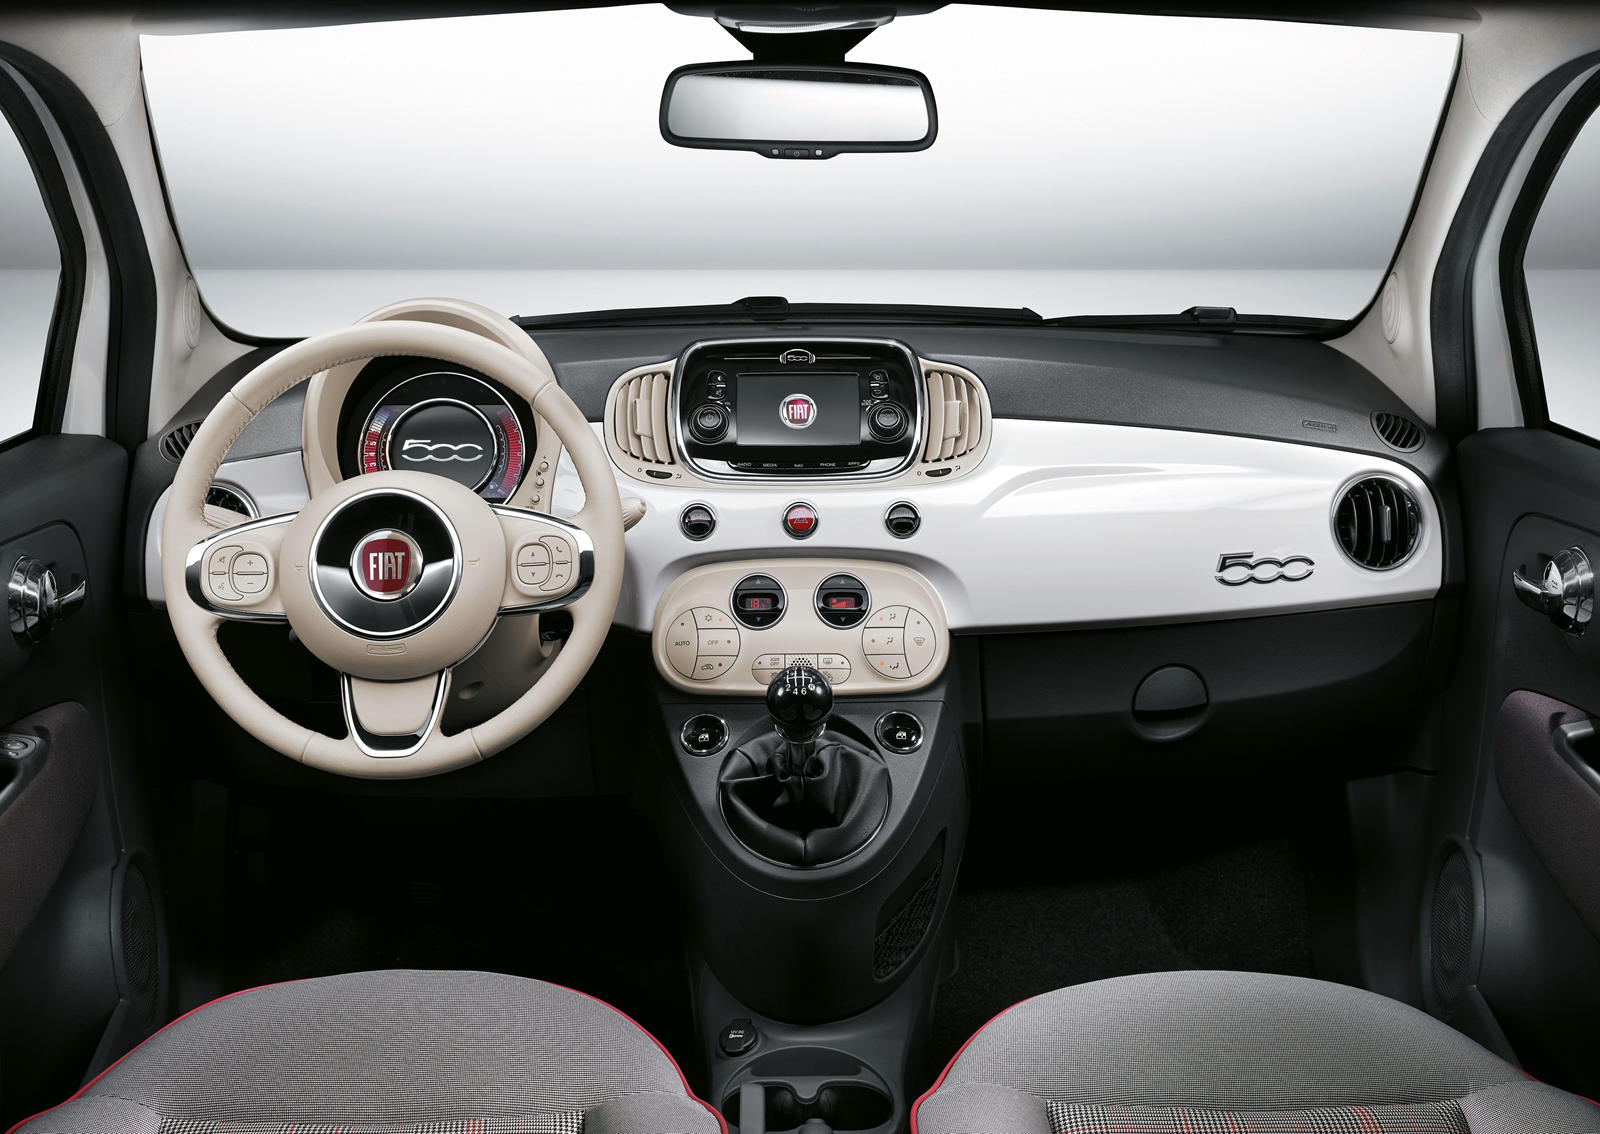 2019 Fiat 500 Interior Dimensions: Seating, Cargo Space & Trunk Size -  Photos